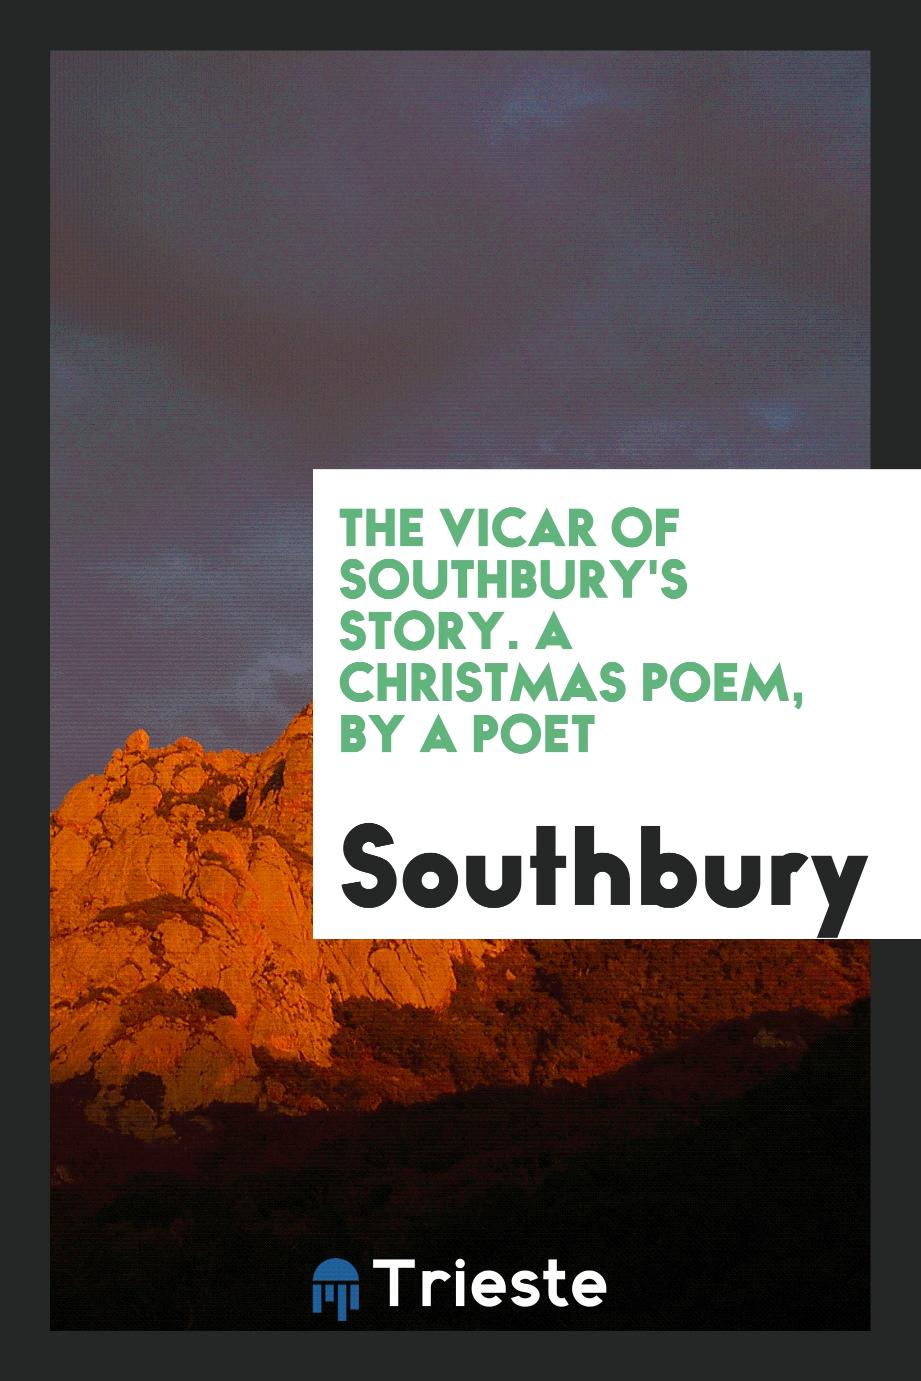 The Vicar of Southbury's Story. A Christmas Poem, by a Poet